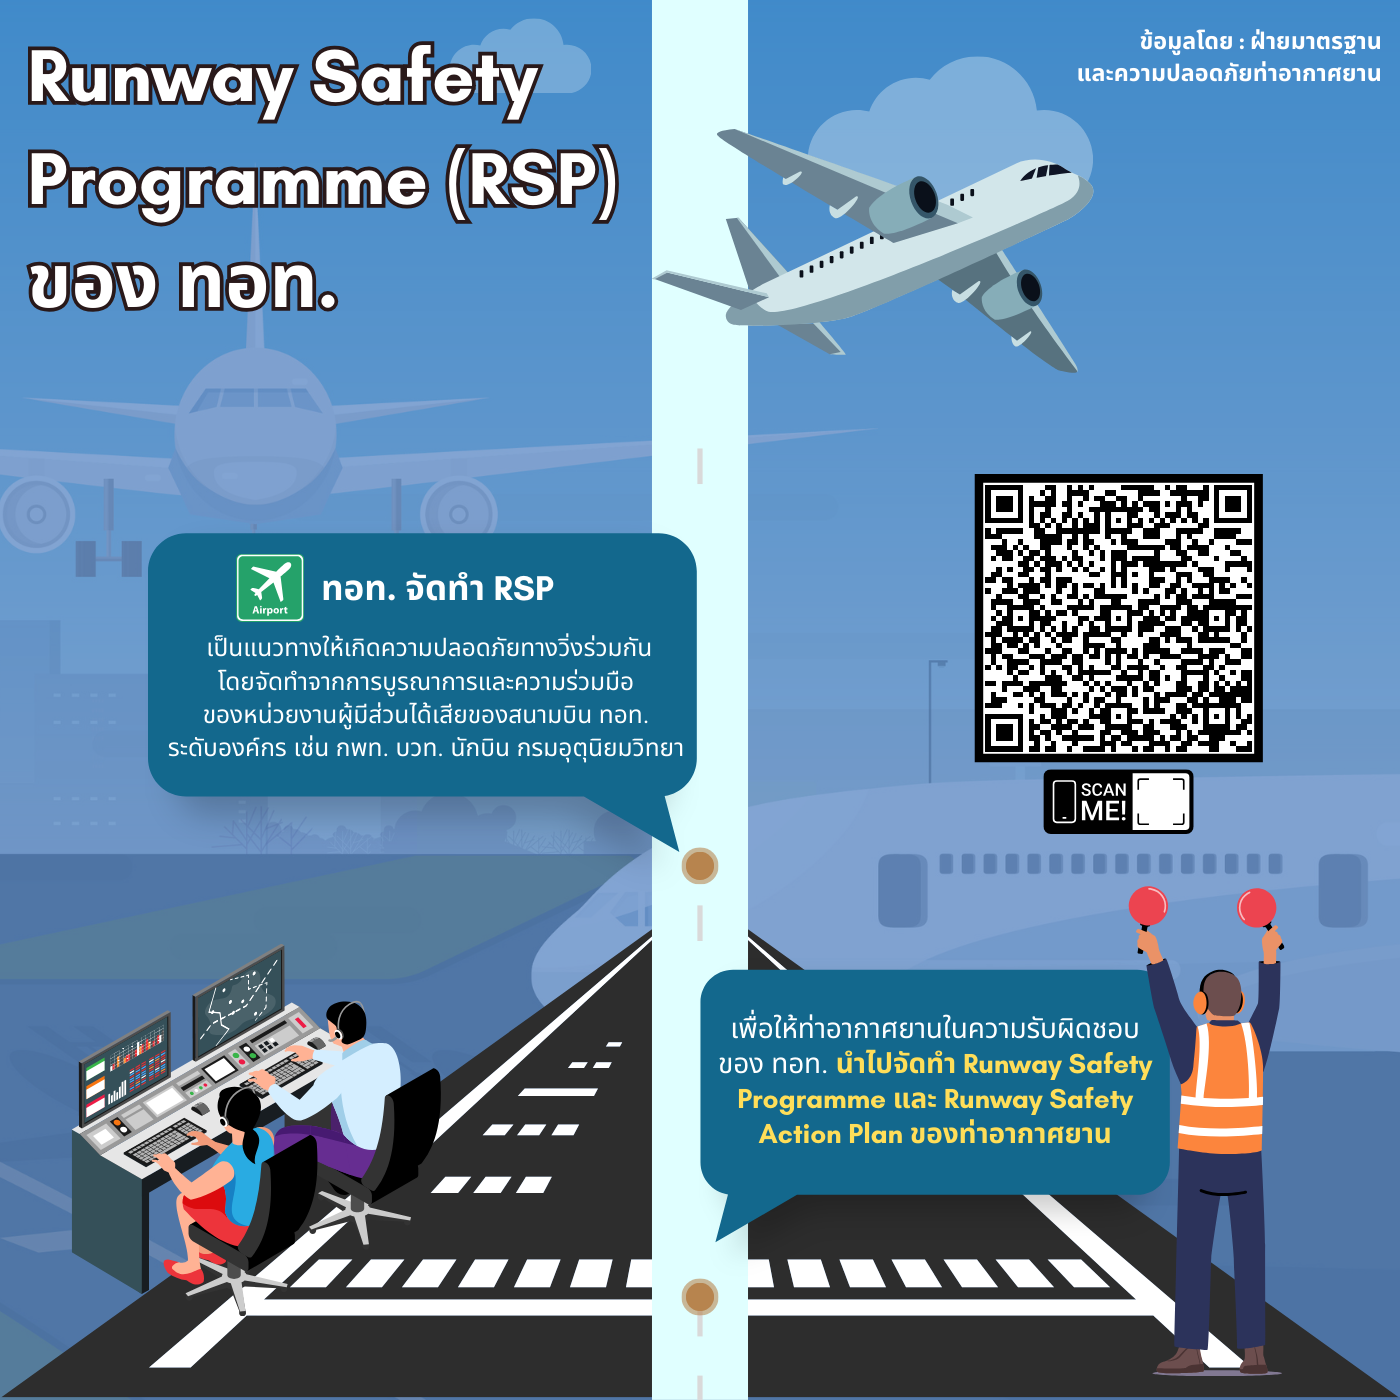 Runway Safety Programme (RSP)